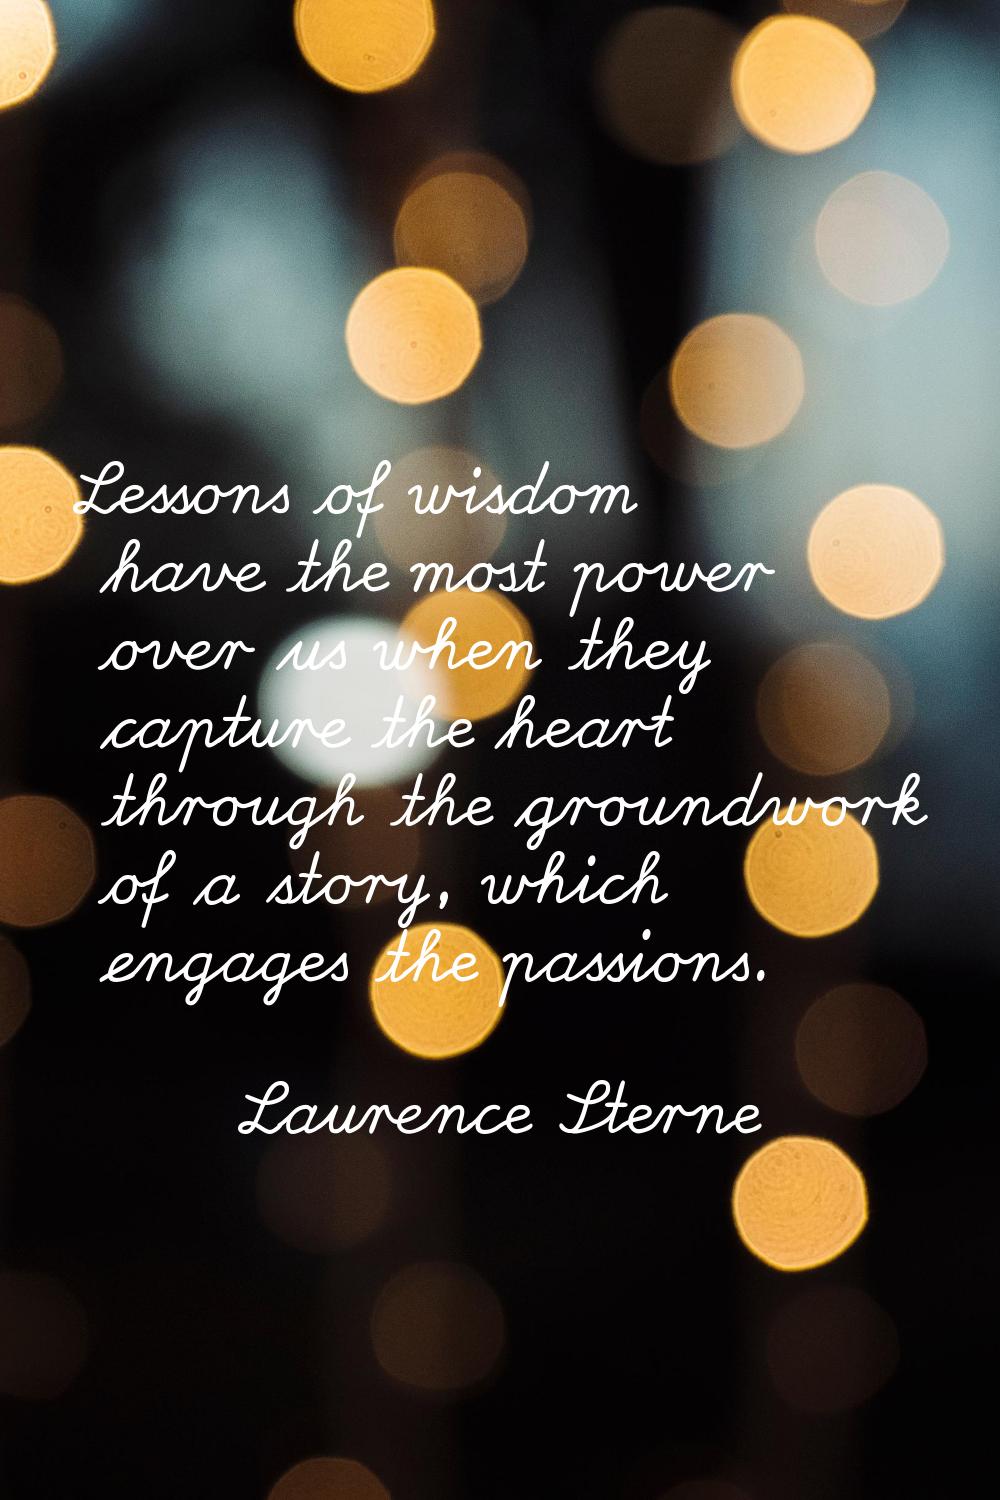 Lessons of wisdom have the most power over us when they capture the heart through the groundwork of